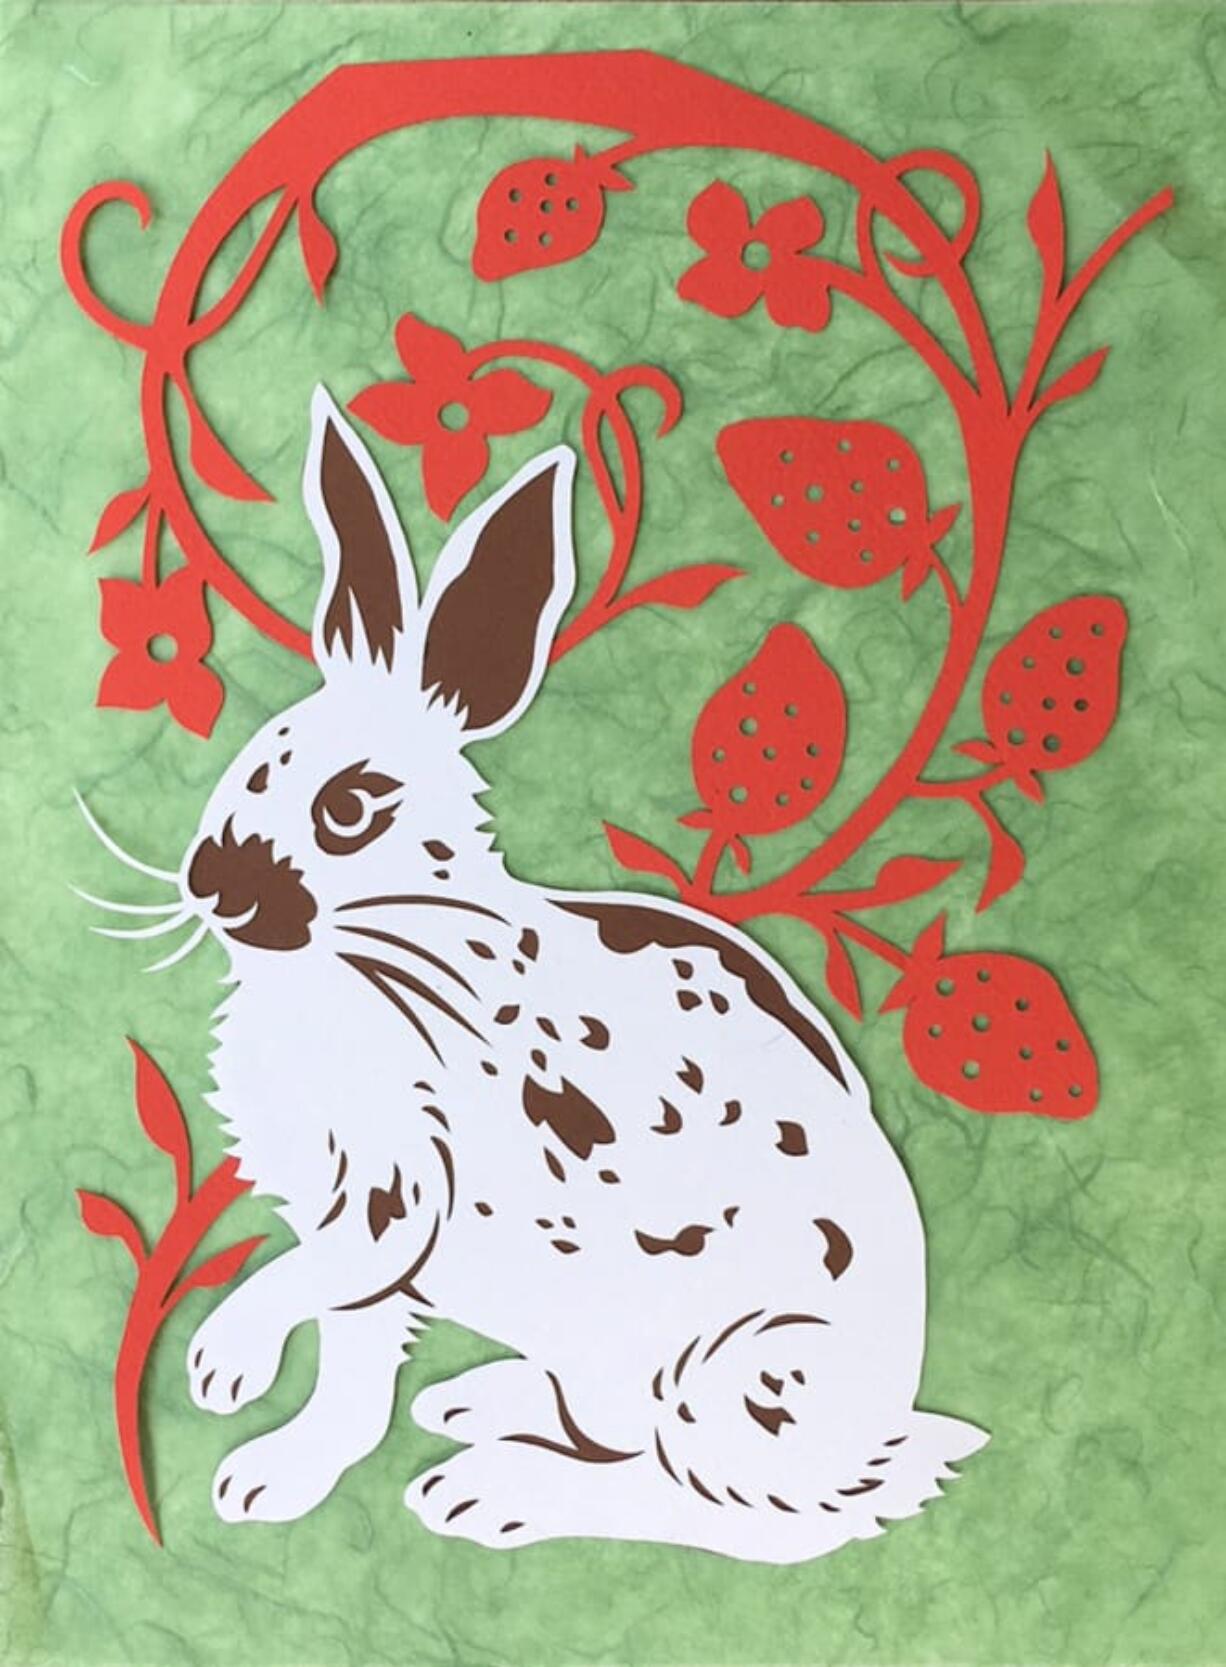 See “Bunny,” an intricate papercut by Muriel Wheatley and Levi Greenacres of Lovebirds Paper. Their exhibit, “Animalibris,” will be on display at the Second Story Gallery in the Camas Library during the month of July.